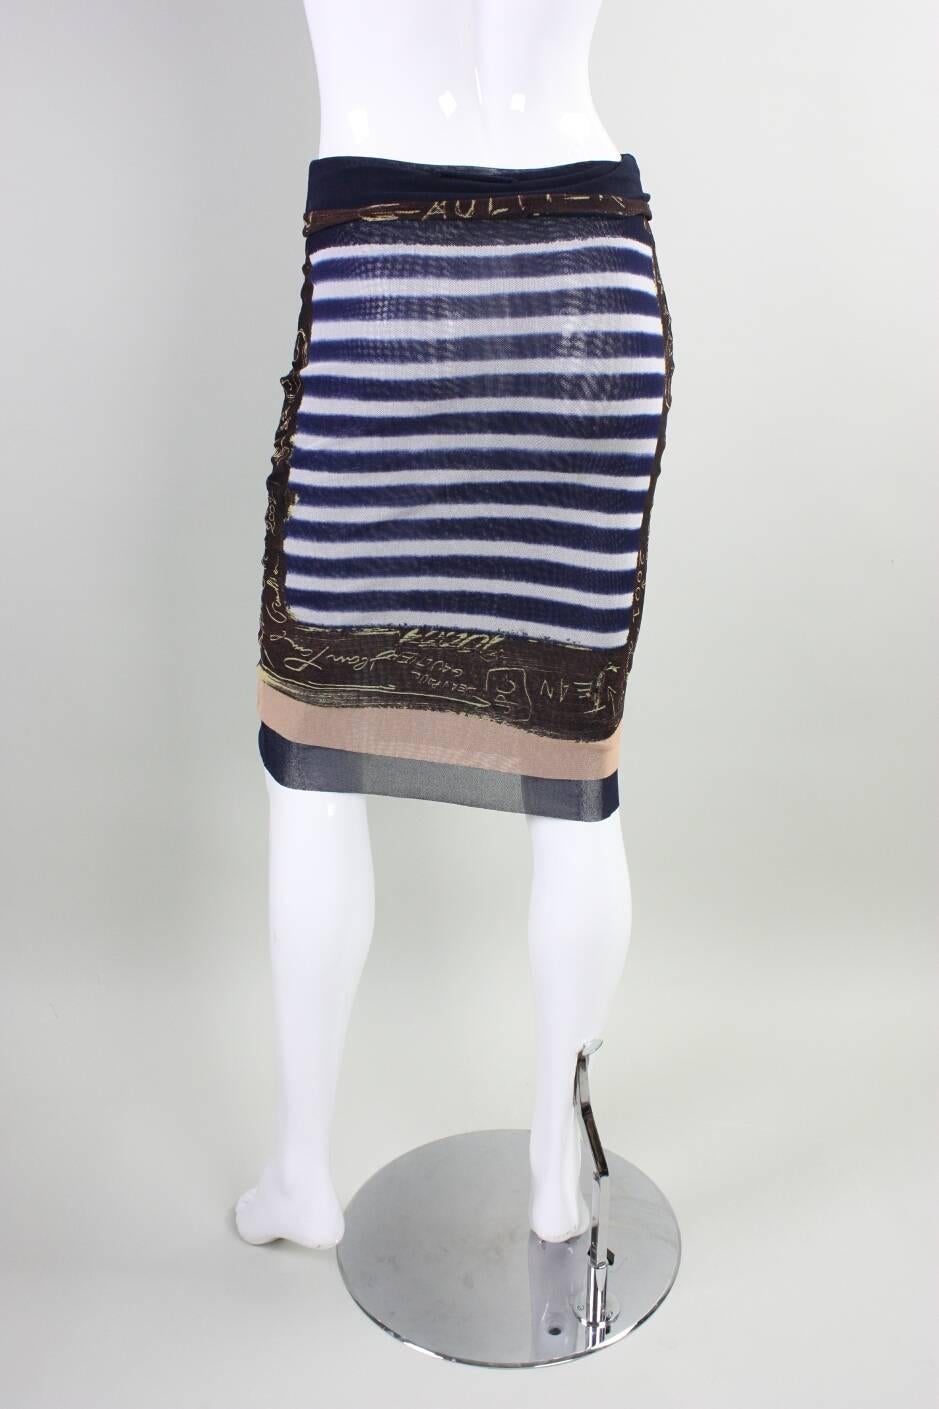 Jean-Paul Gaultier navy & white striped skirt dates to the early 2000's and is made of 100% nylon netting.  Fold over waistband.  No closures.  Lined with same stretch fabric.

Labeled size Medium.

Condition: Excellent.

Measurements-

Waist: